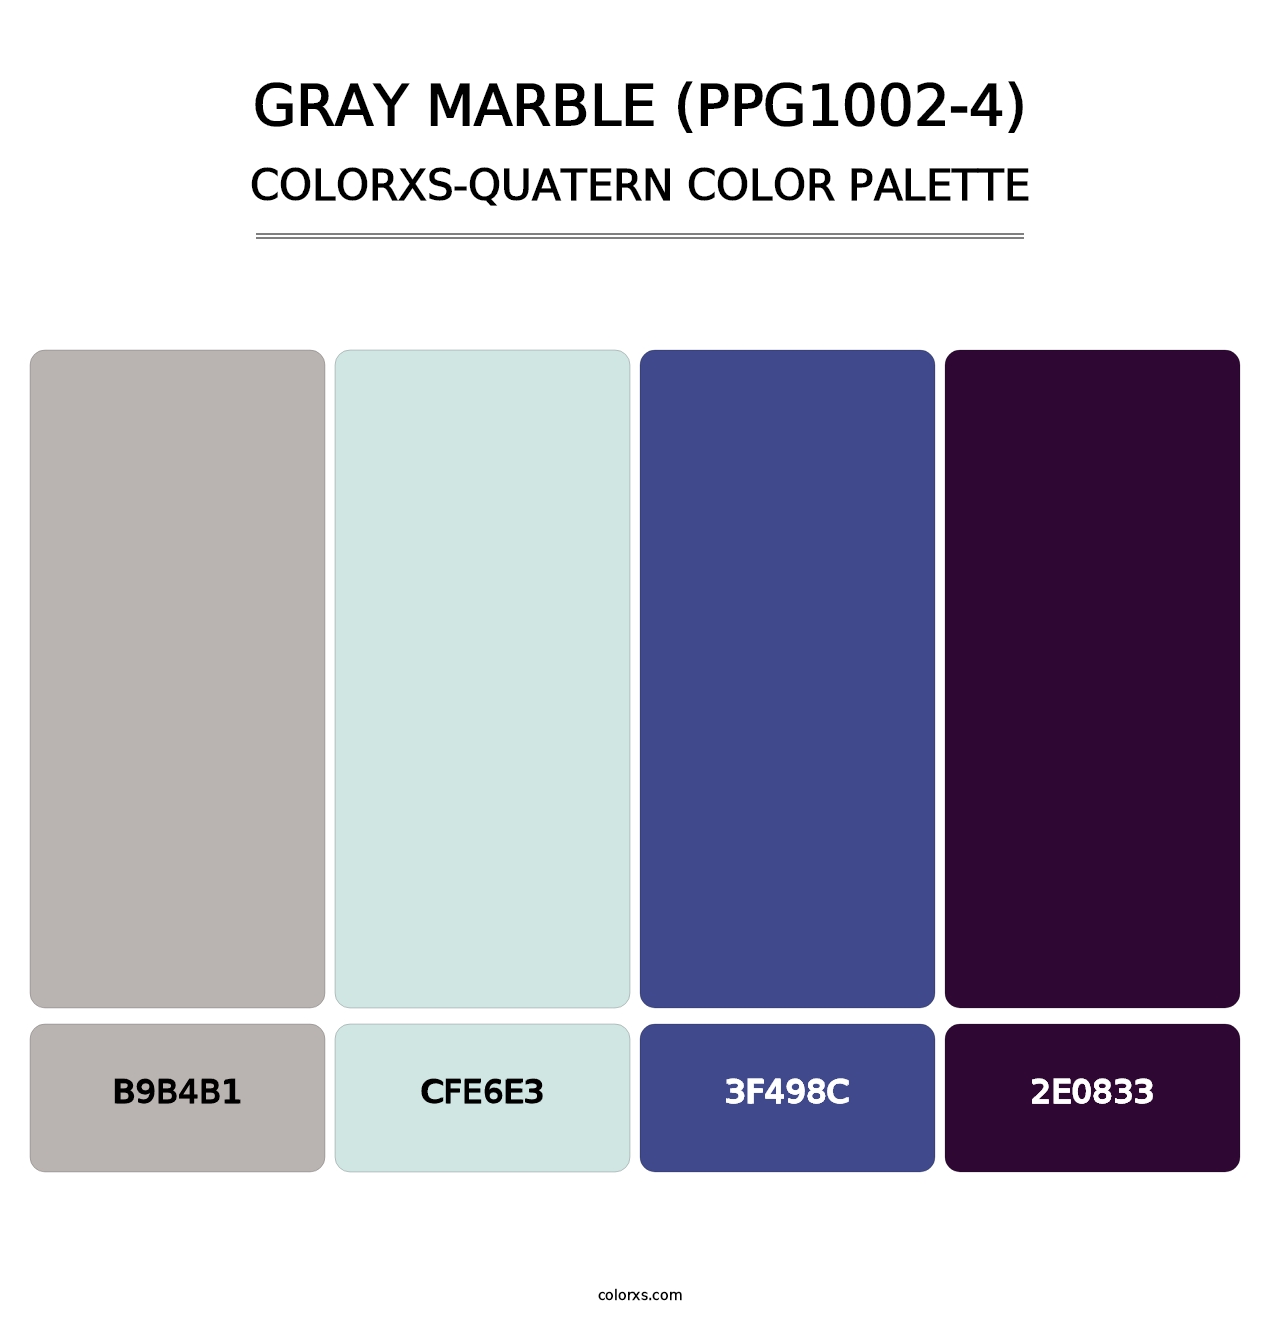 Gray Marble (PPG1002-4) - Colorxs Quatern Palette